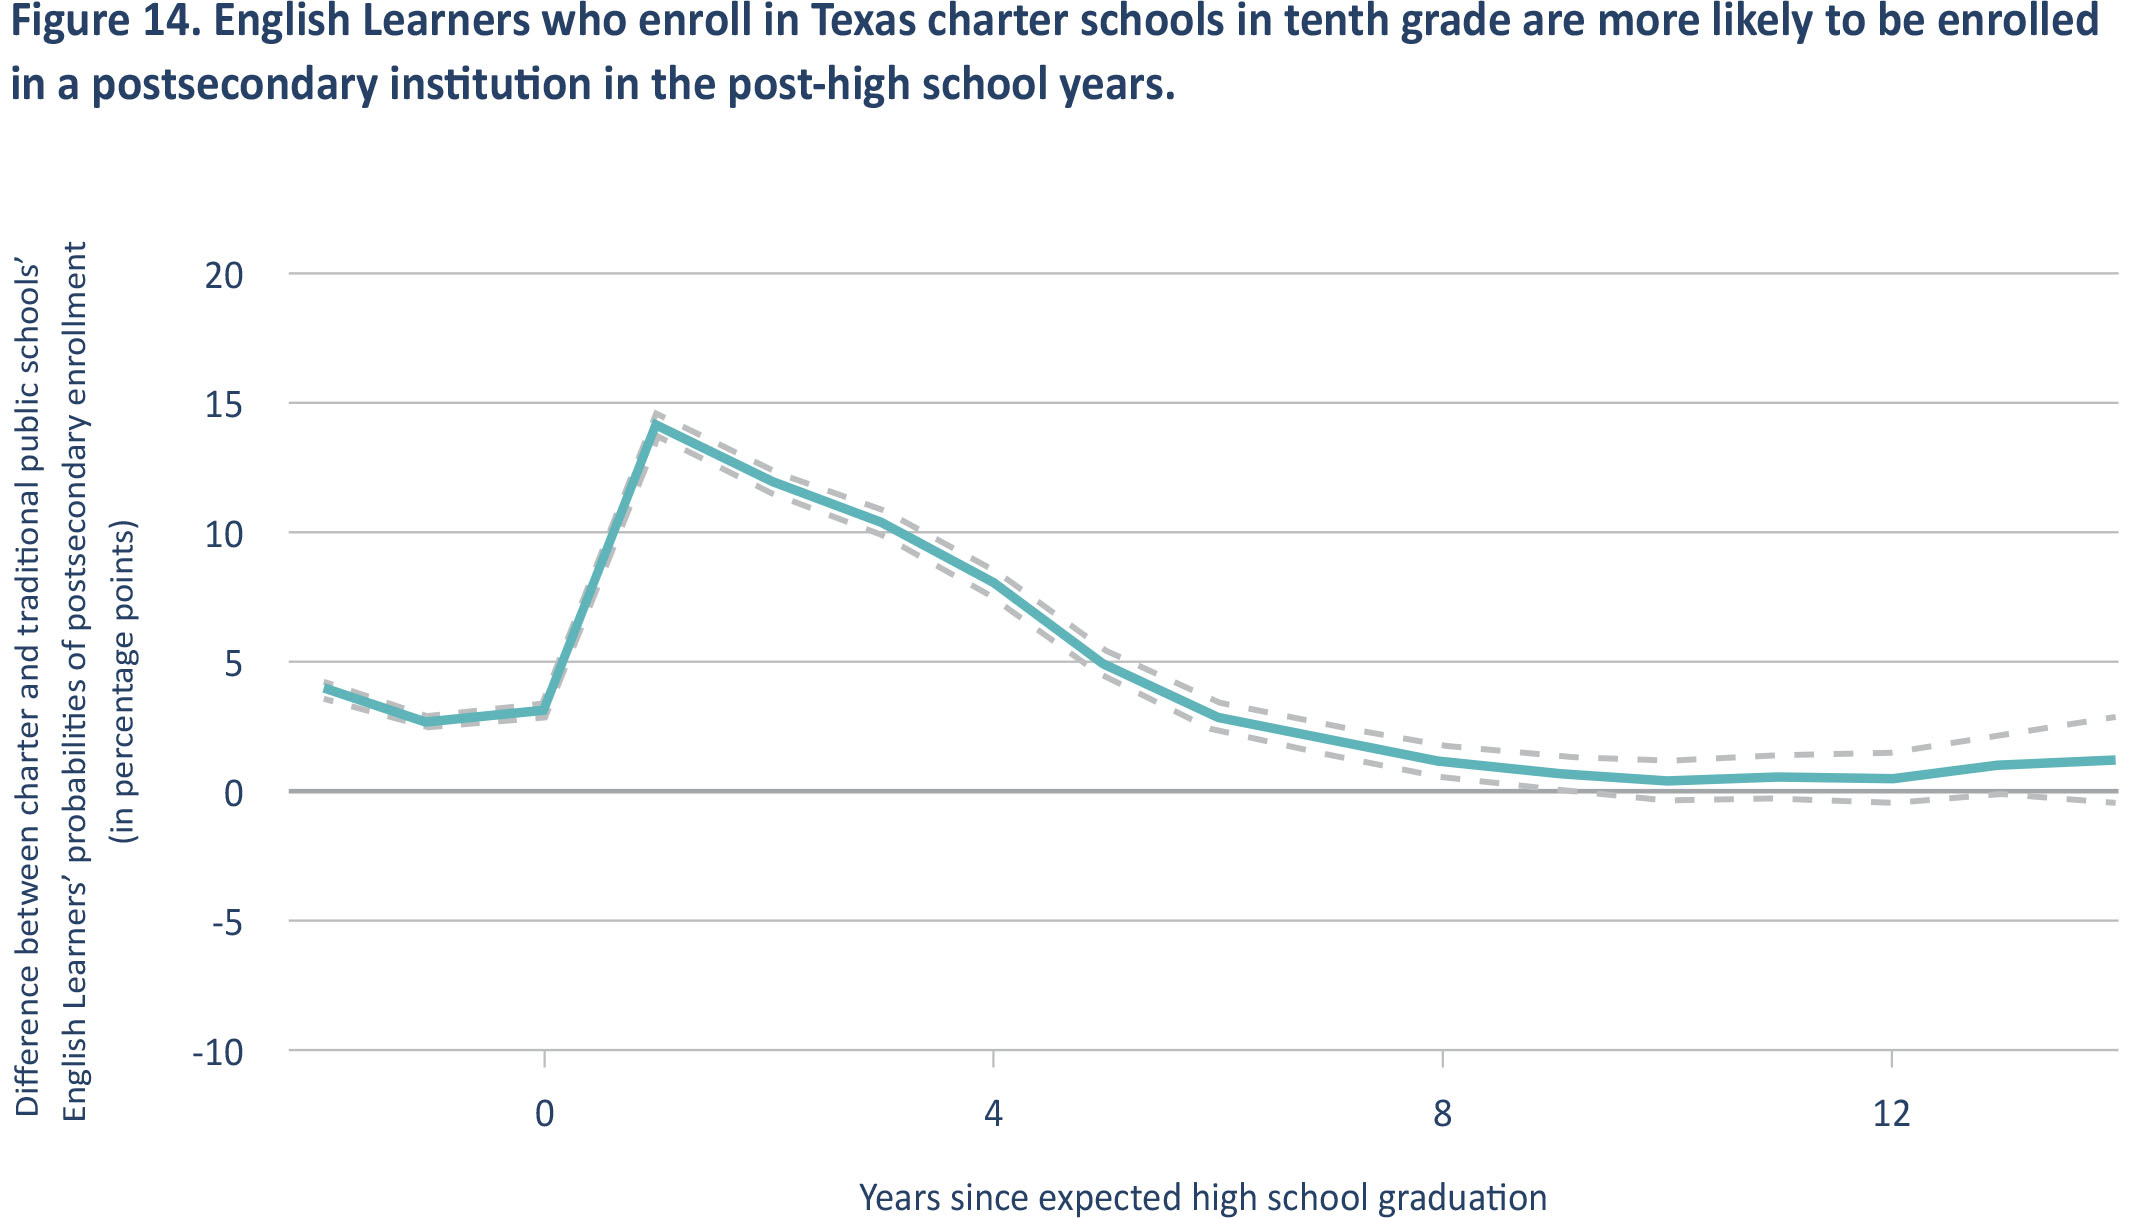 Figure 14, English Learners who enroll in Texas charter schools in tenth grade are more likely to be enrolled in a postsecondary institution in the post-high school years.